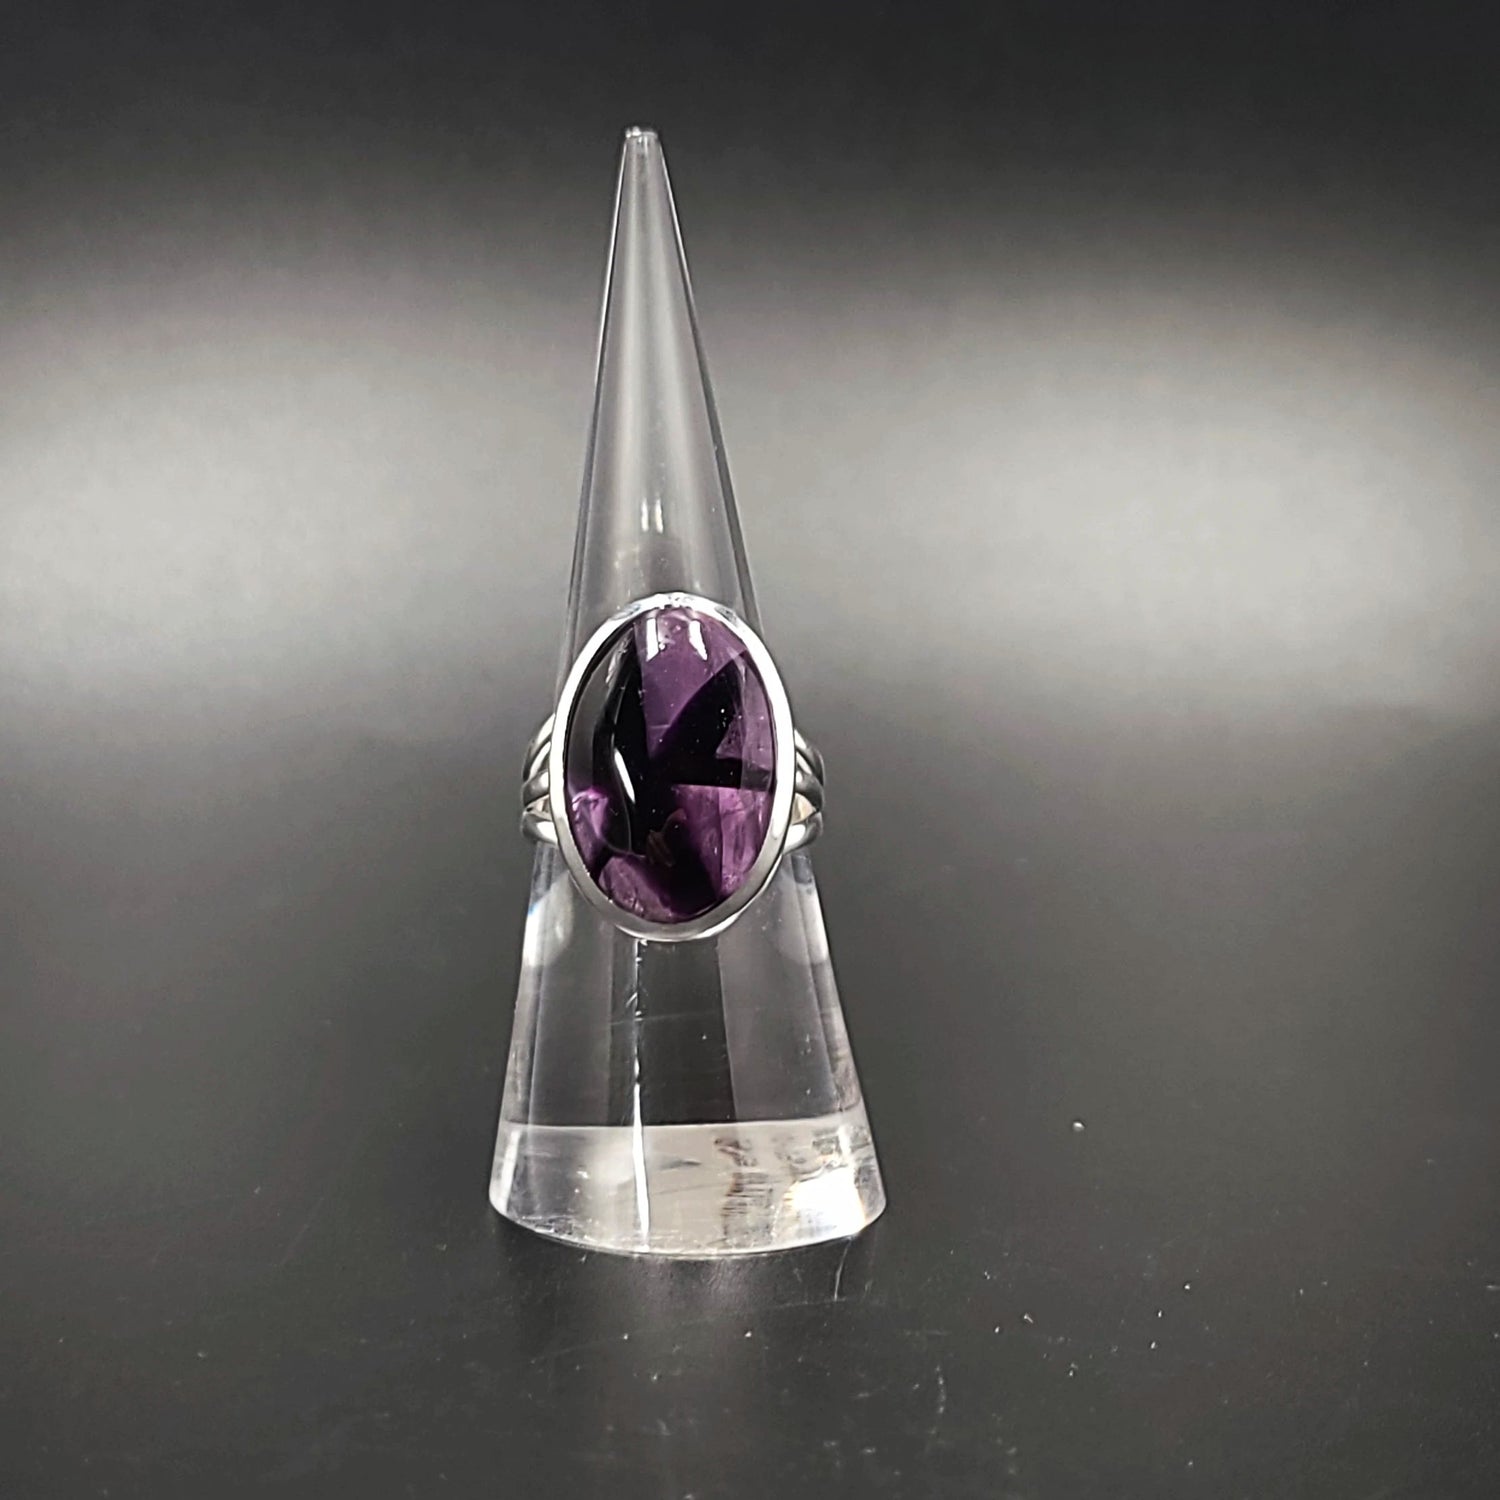 Star Amethyst Ring Sterling Silver Band Oval - Elevated Metaphysical